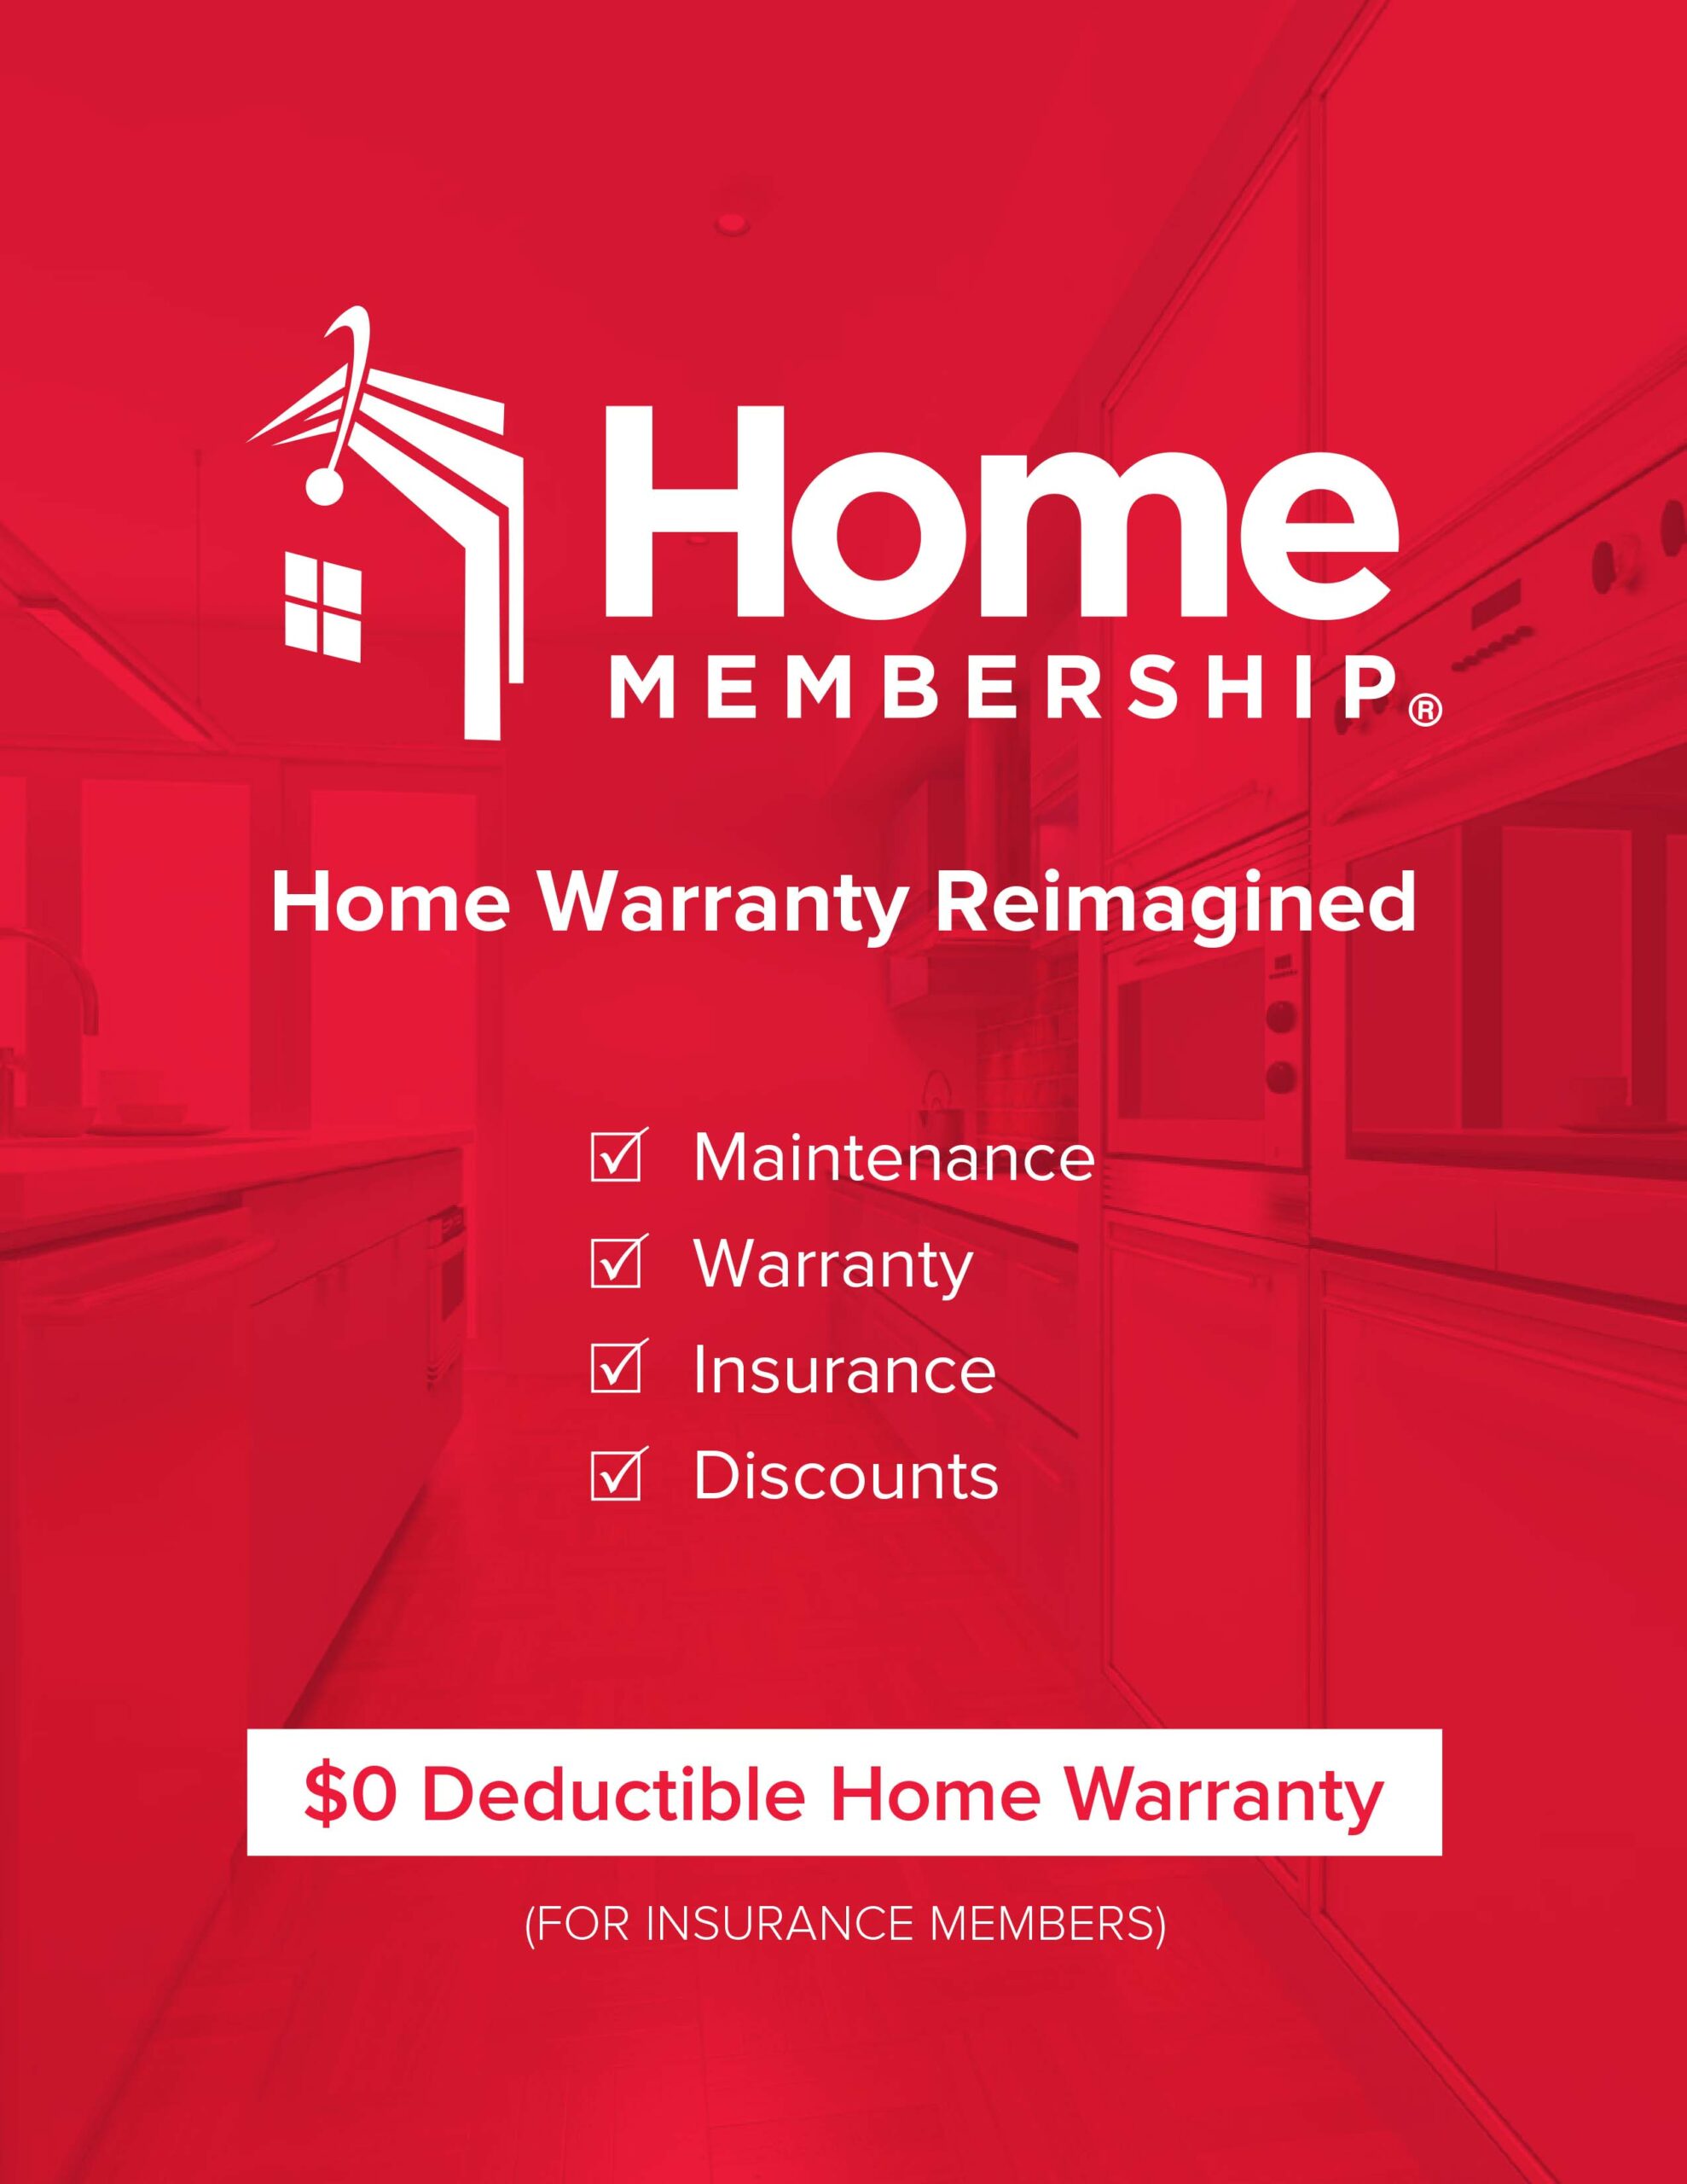 Going through the home buying process can be exciting and stressful. But once you have the keys to your home - it's all worth it! Best home warranty - HomeMembership